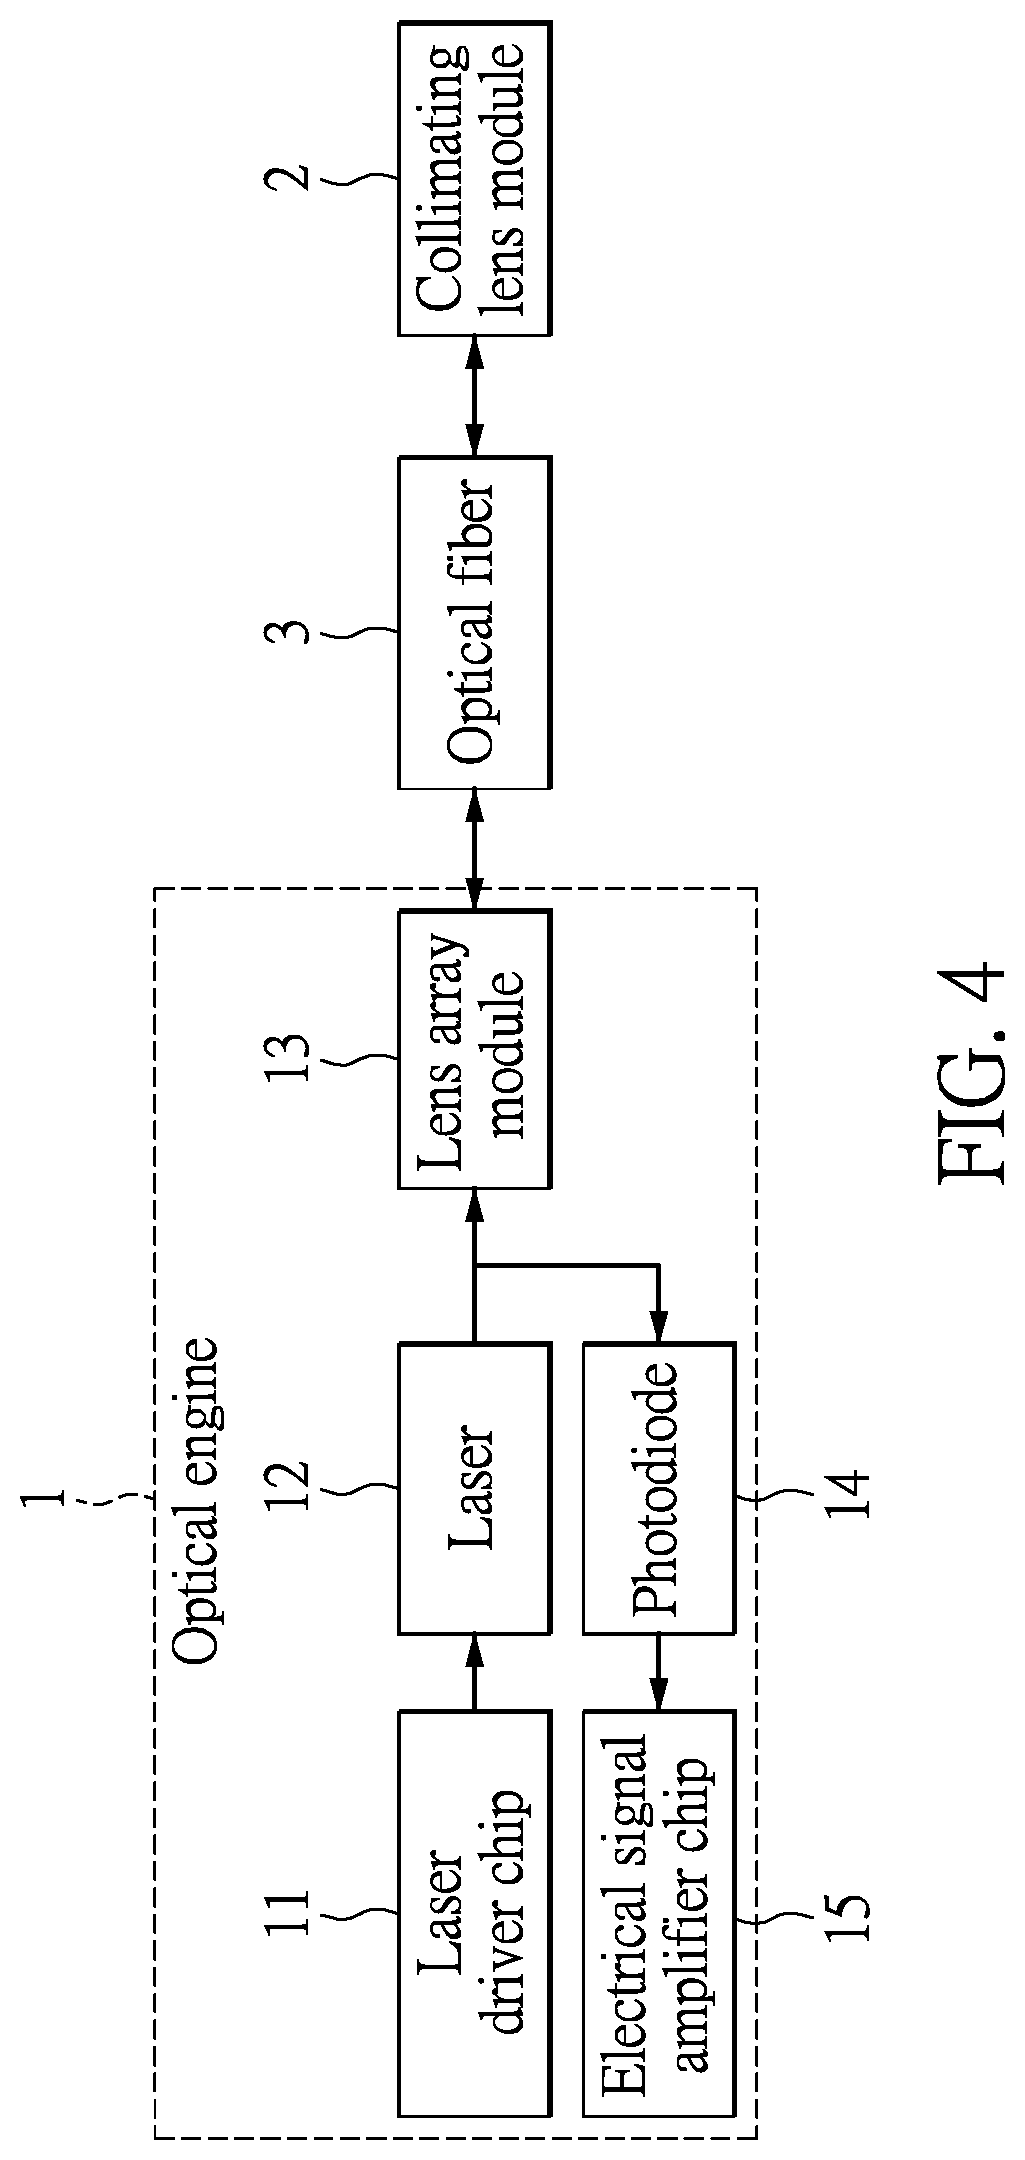 Free-space optical signal alignment and transmission device, system and method